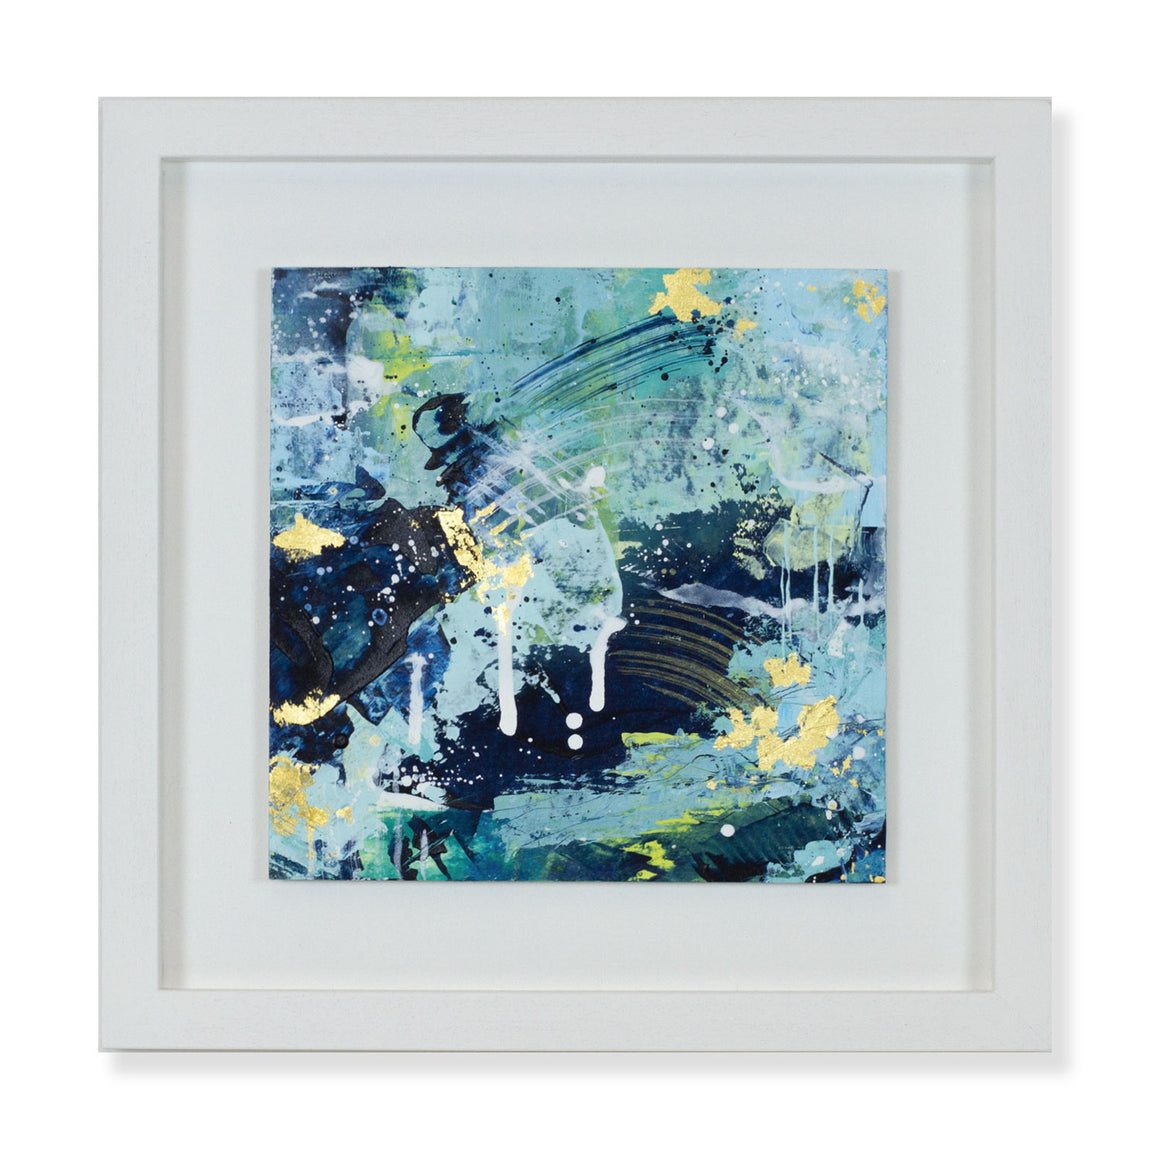 Elysium | Framed blue green abstract landscape painting 35cm